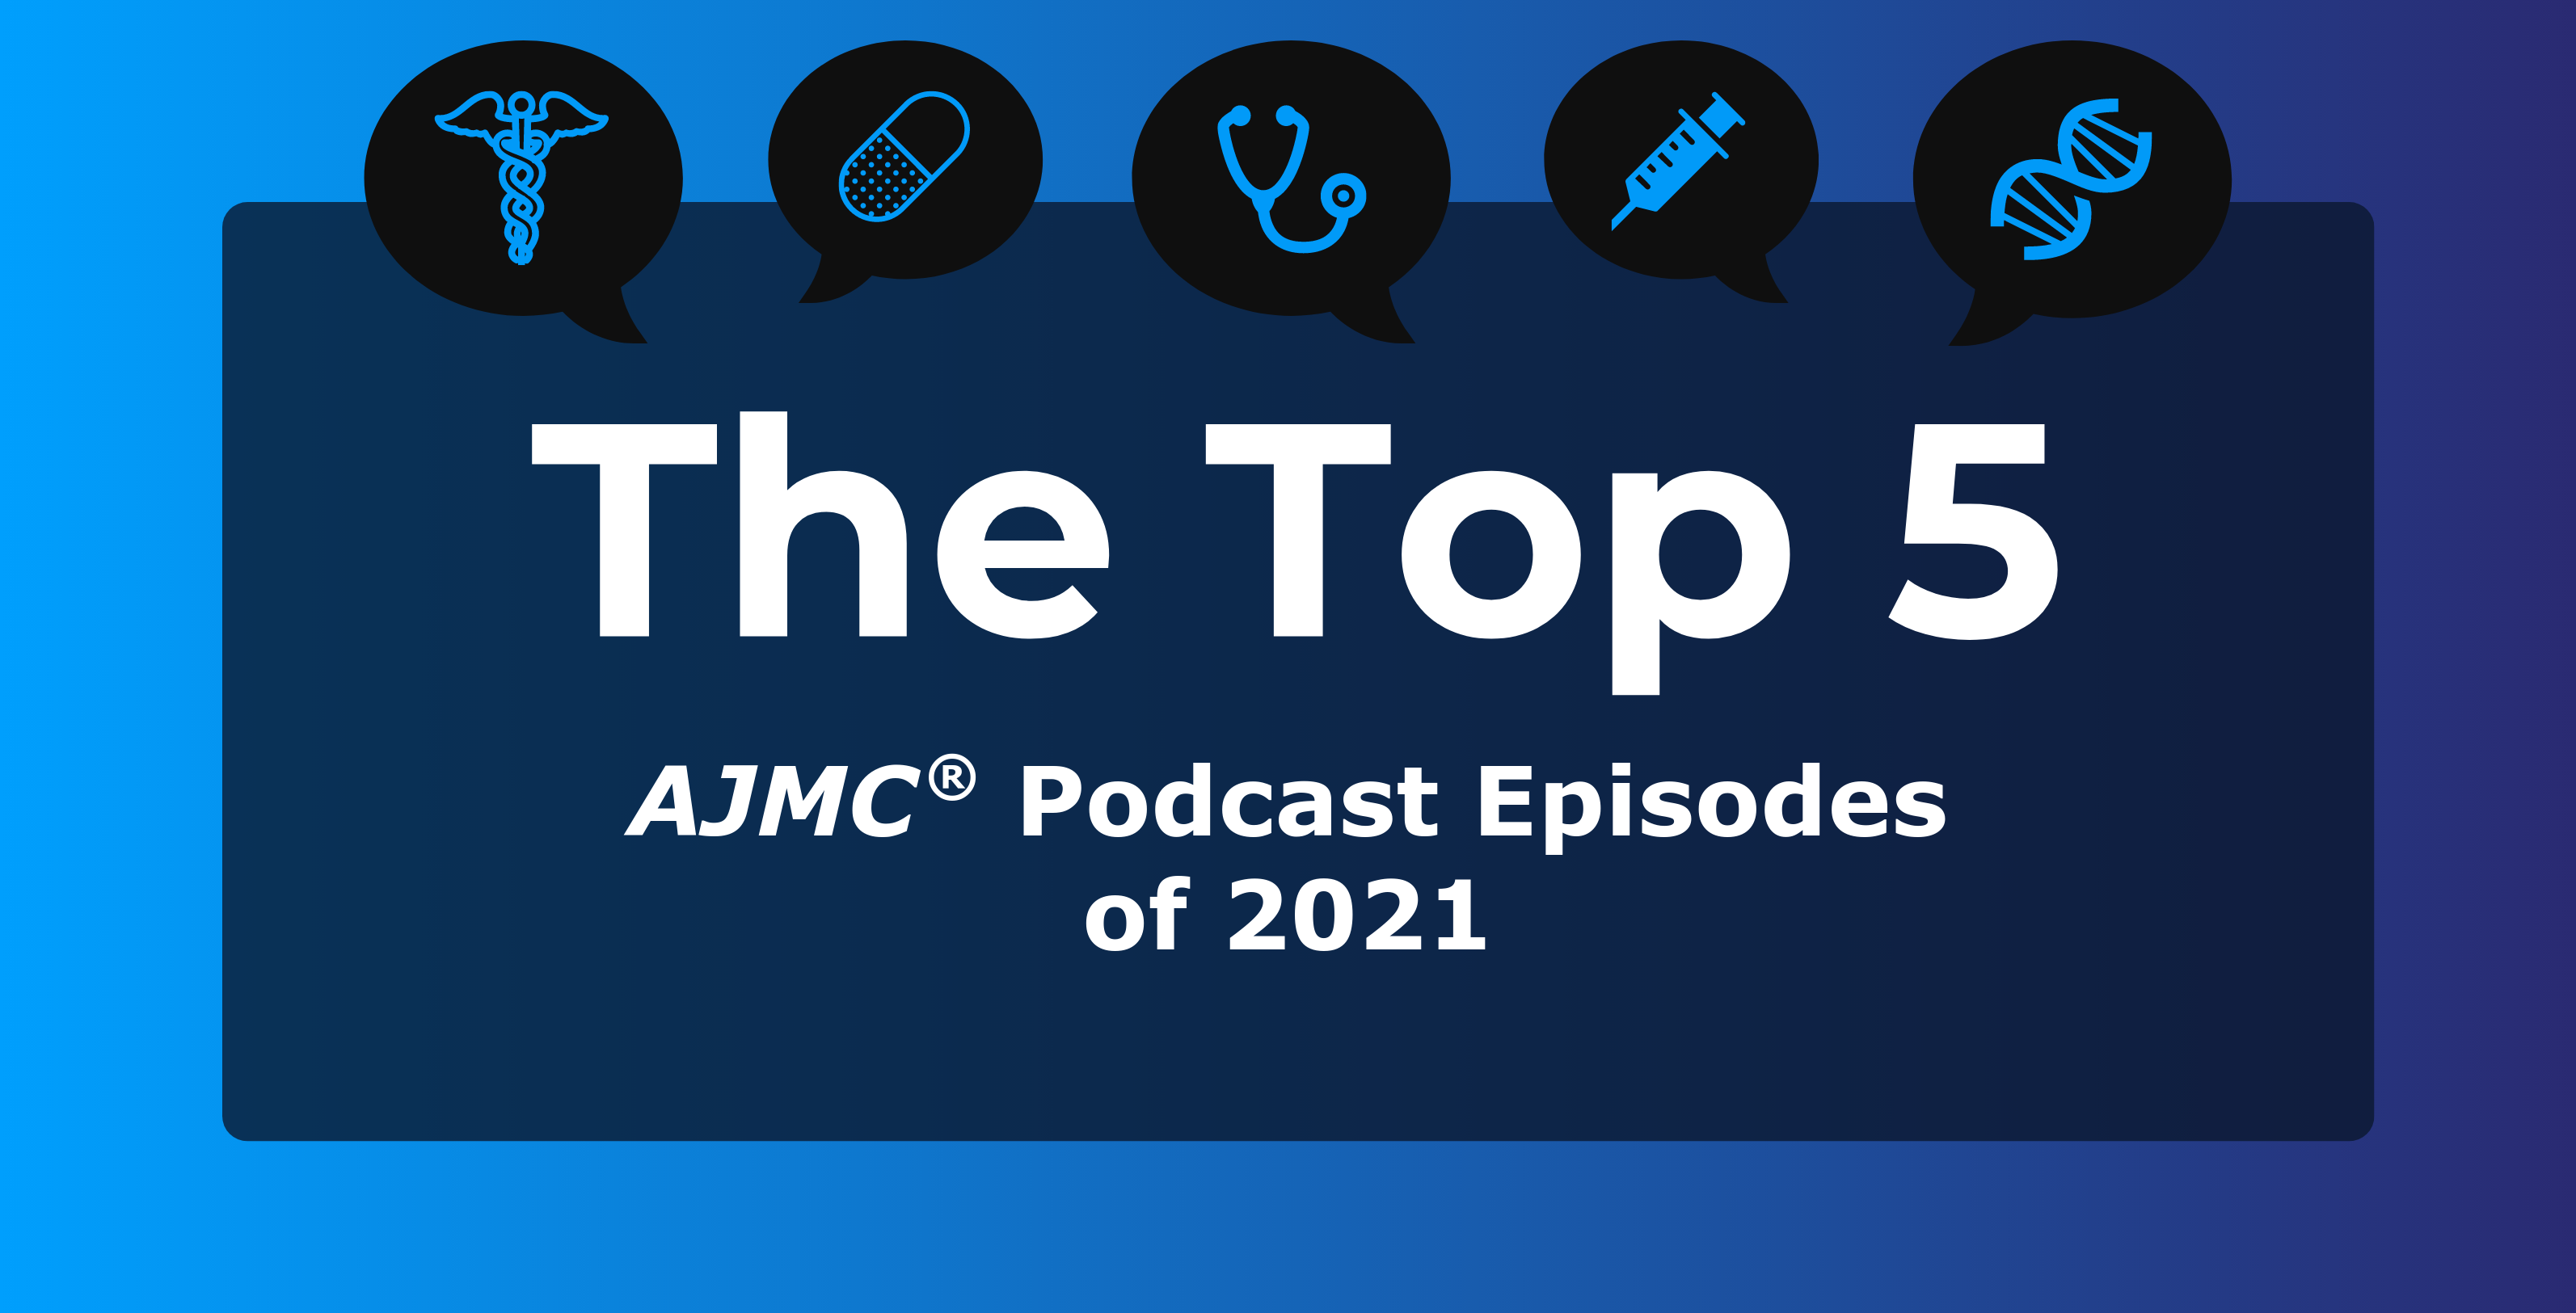 Top 5 Most-Listened to Podcast Episodes of 2021